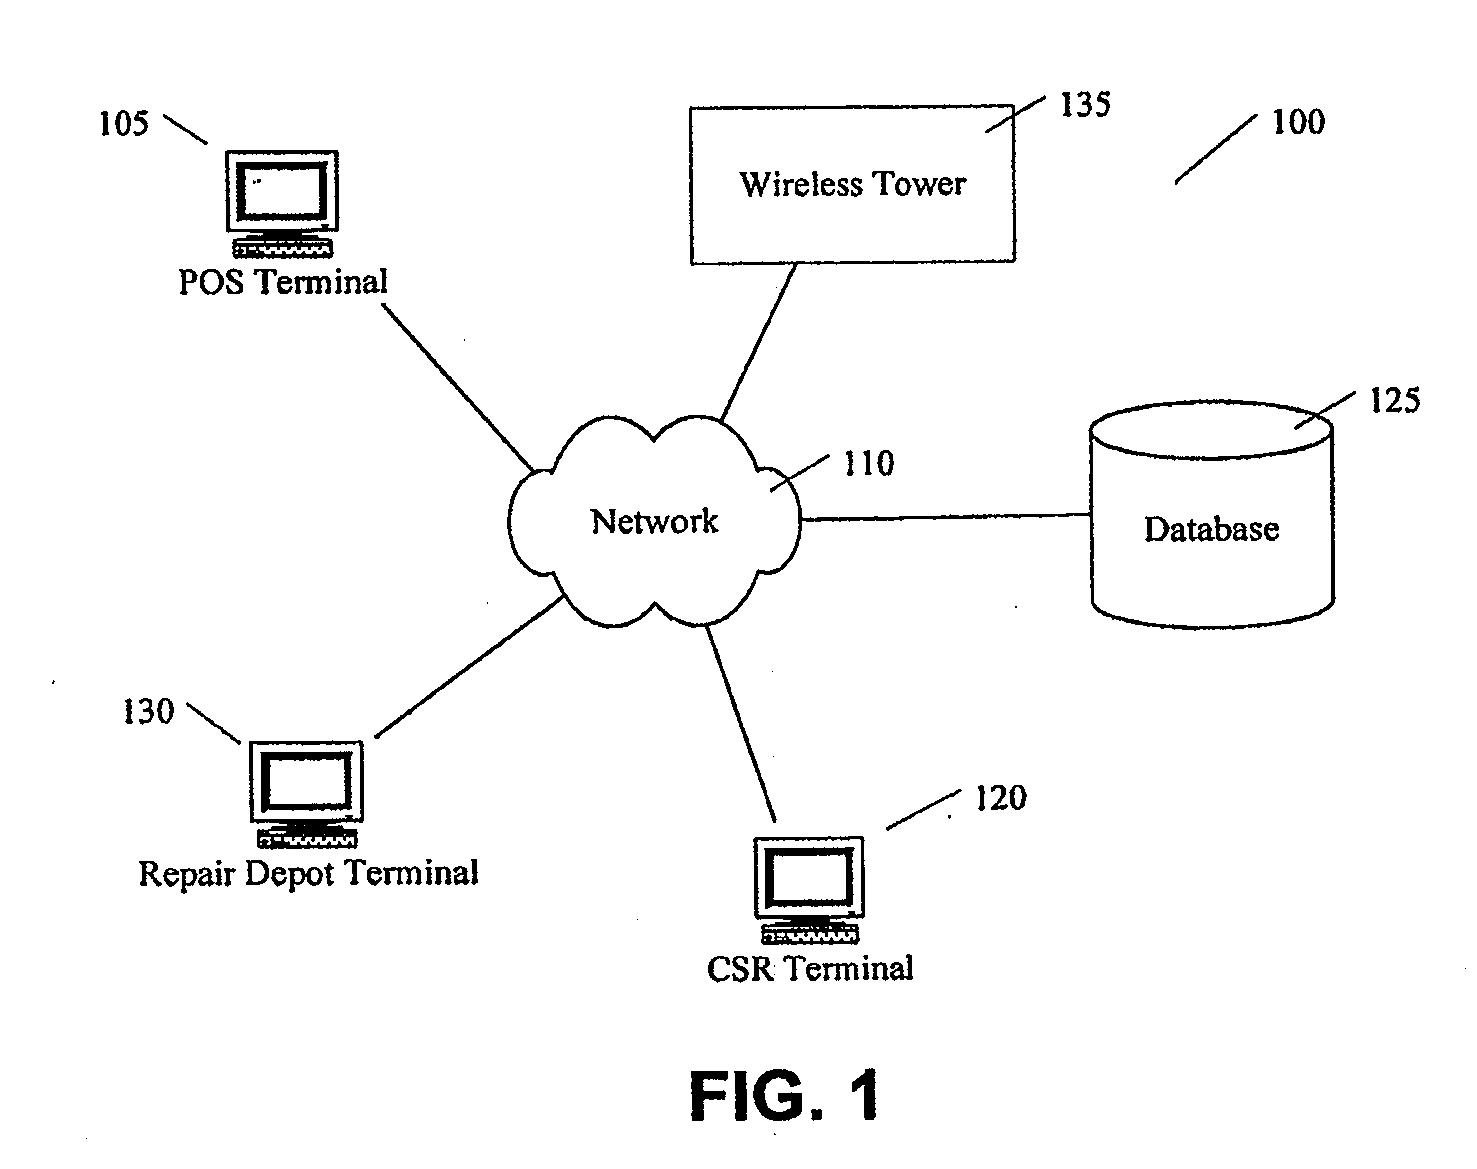 Systems and methods for providing insurance and non-insurance products